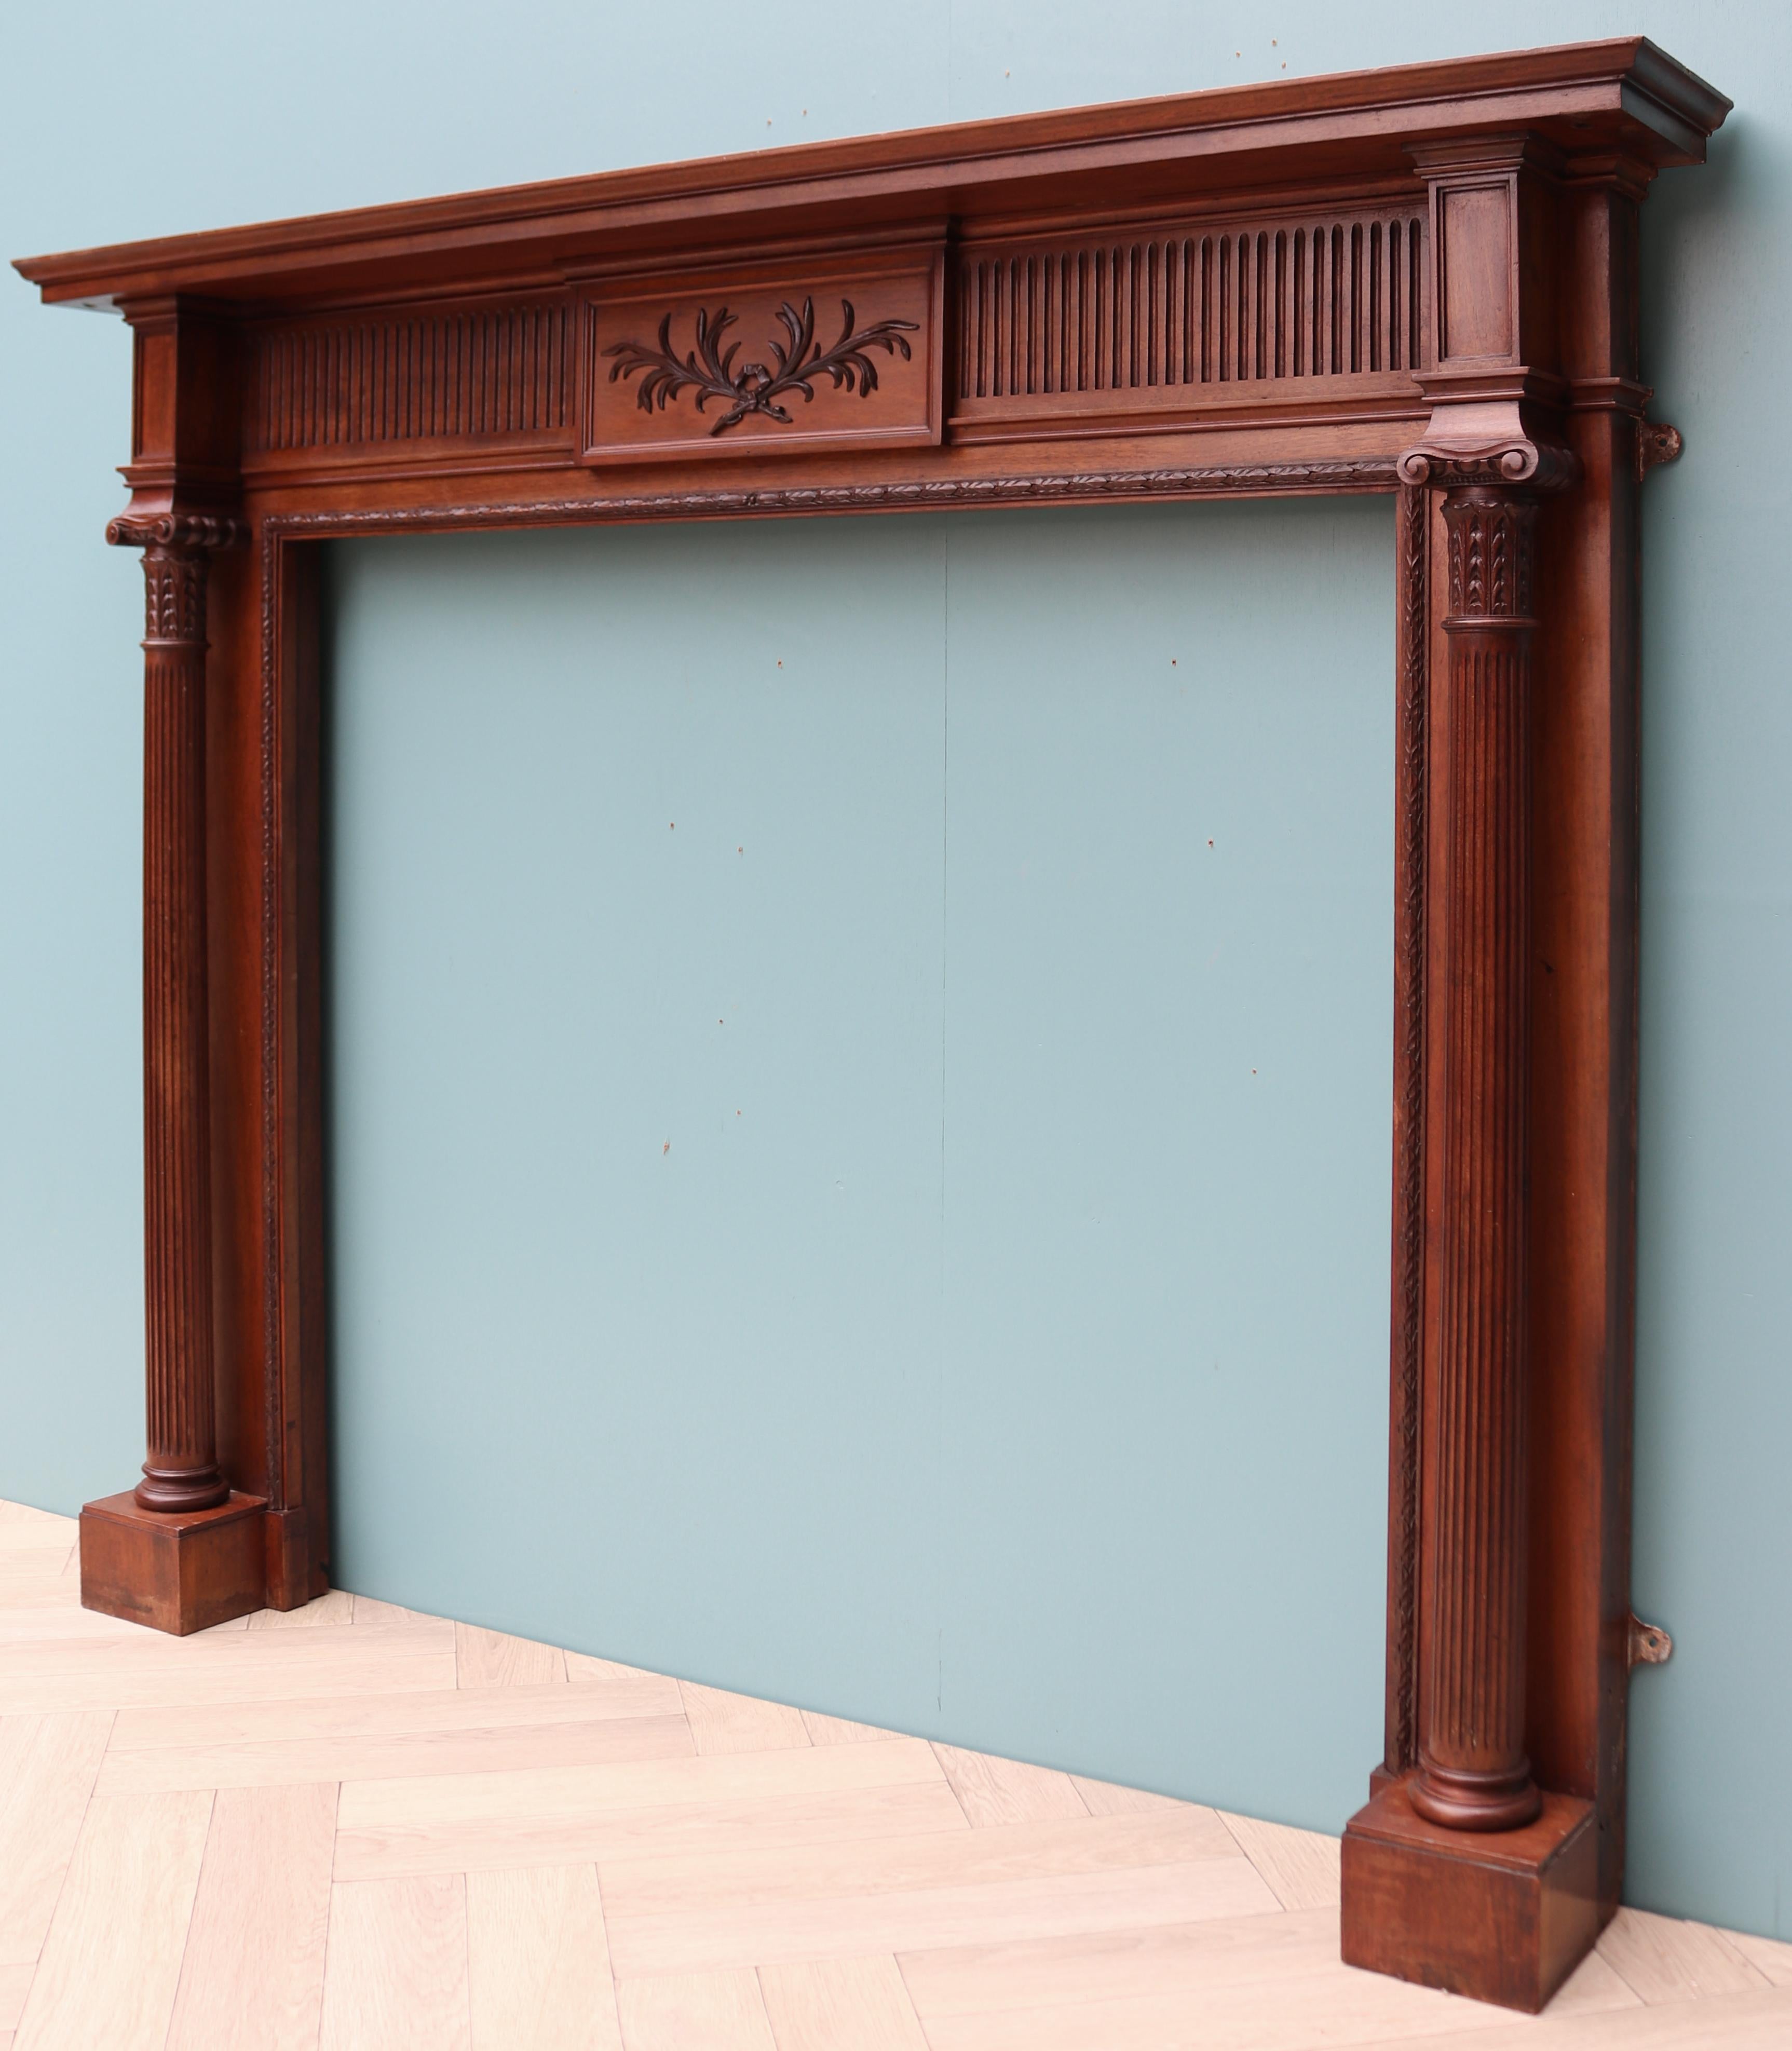 Antique Carved Walnut Mantel In Fair Condition For Sale In Wormelow, Herefordshire